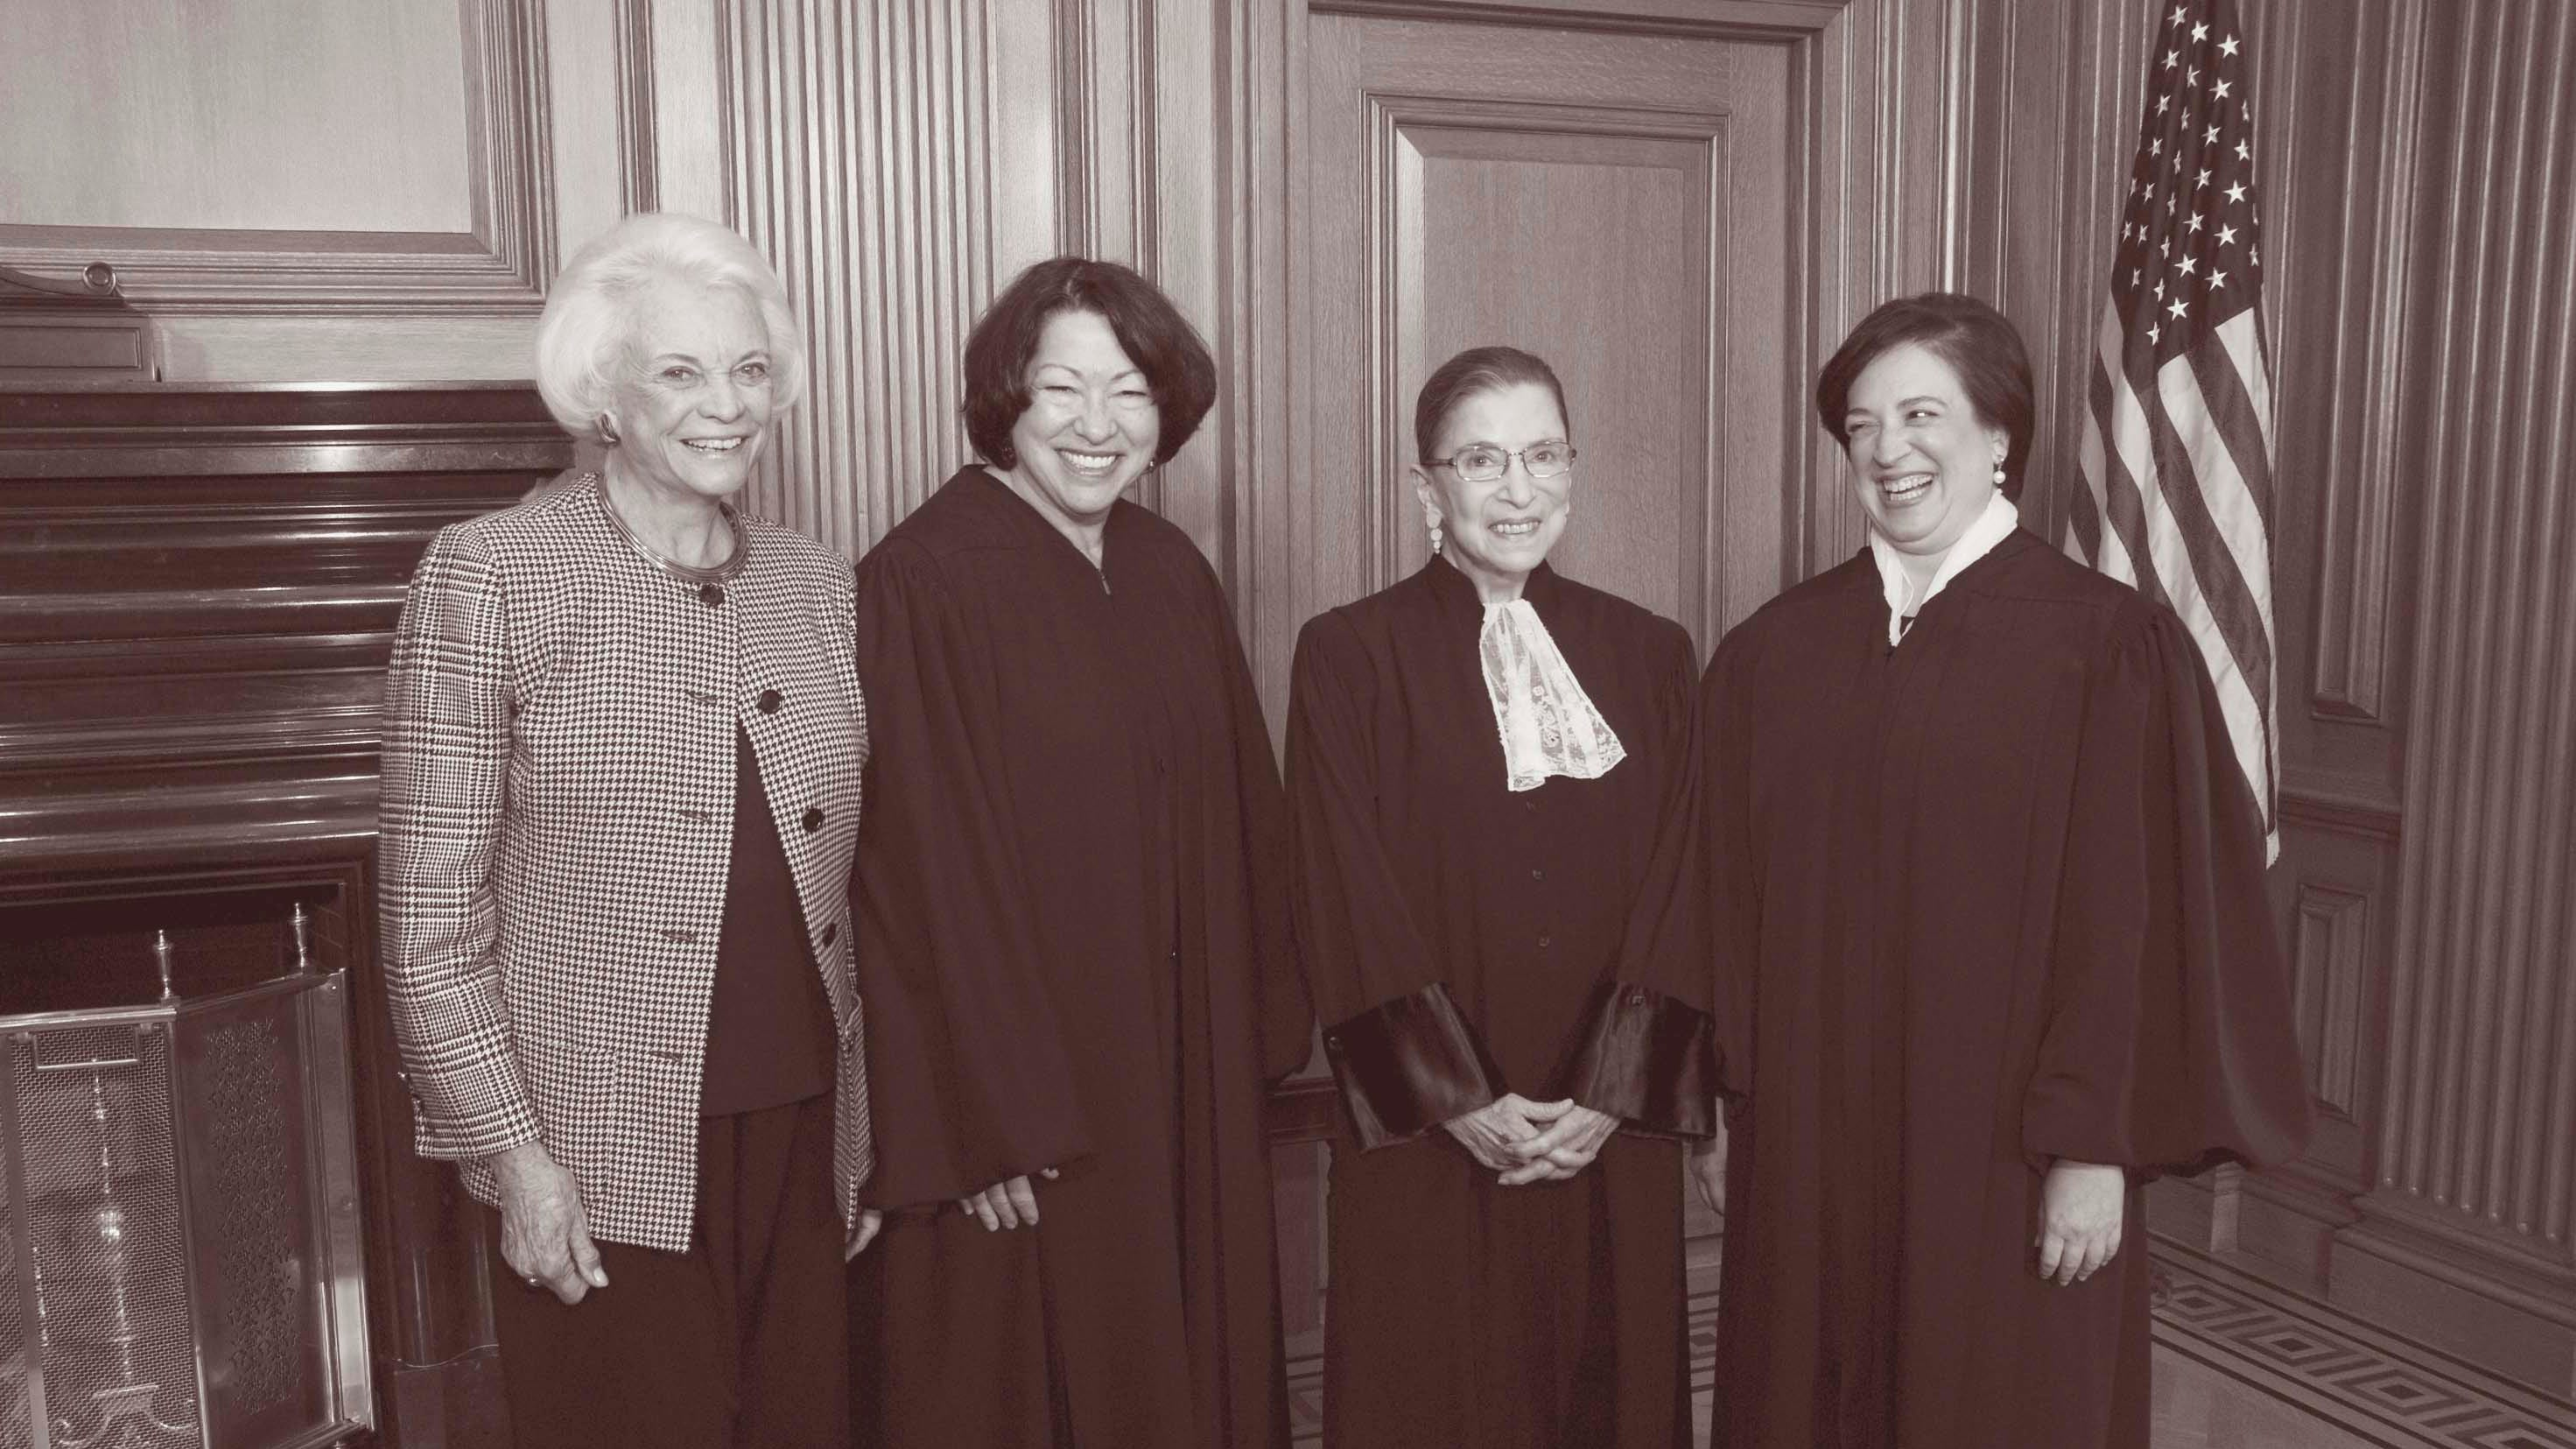 In Re Lady Lawyers: A Judicial Legacy